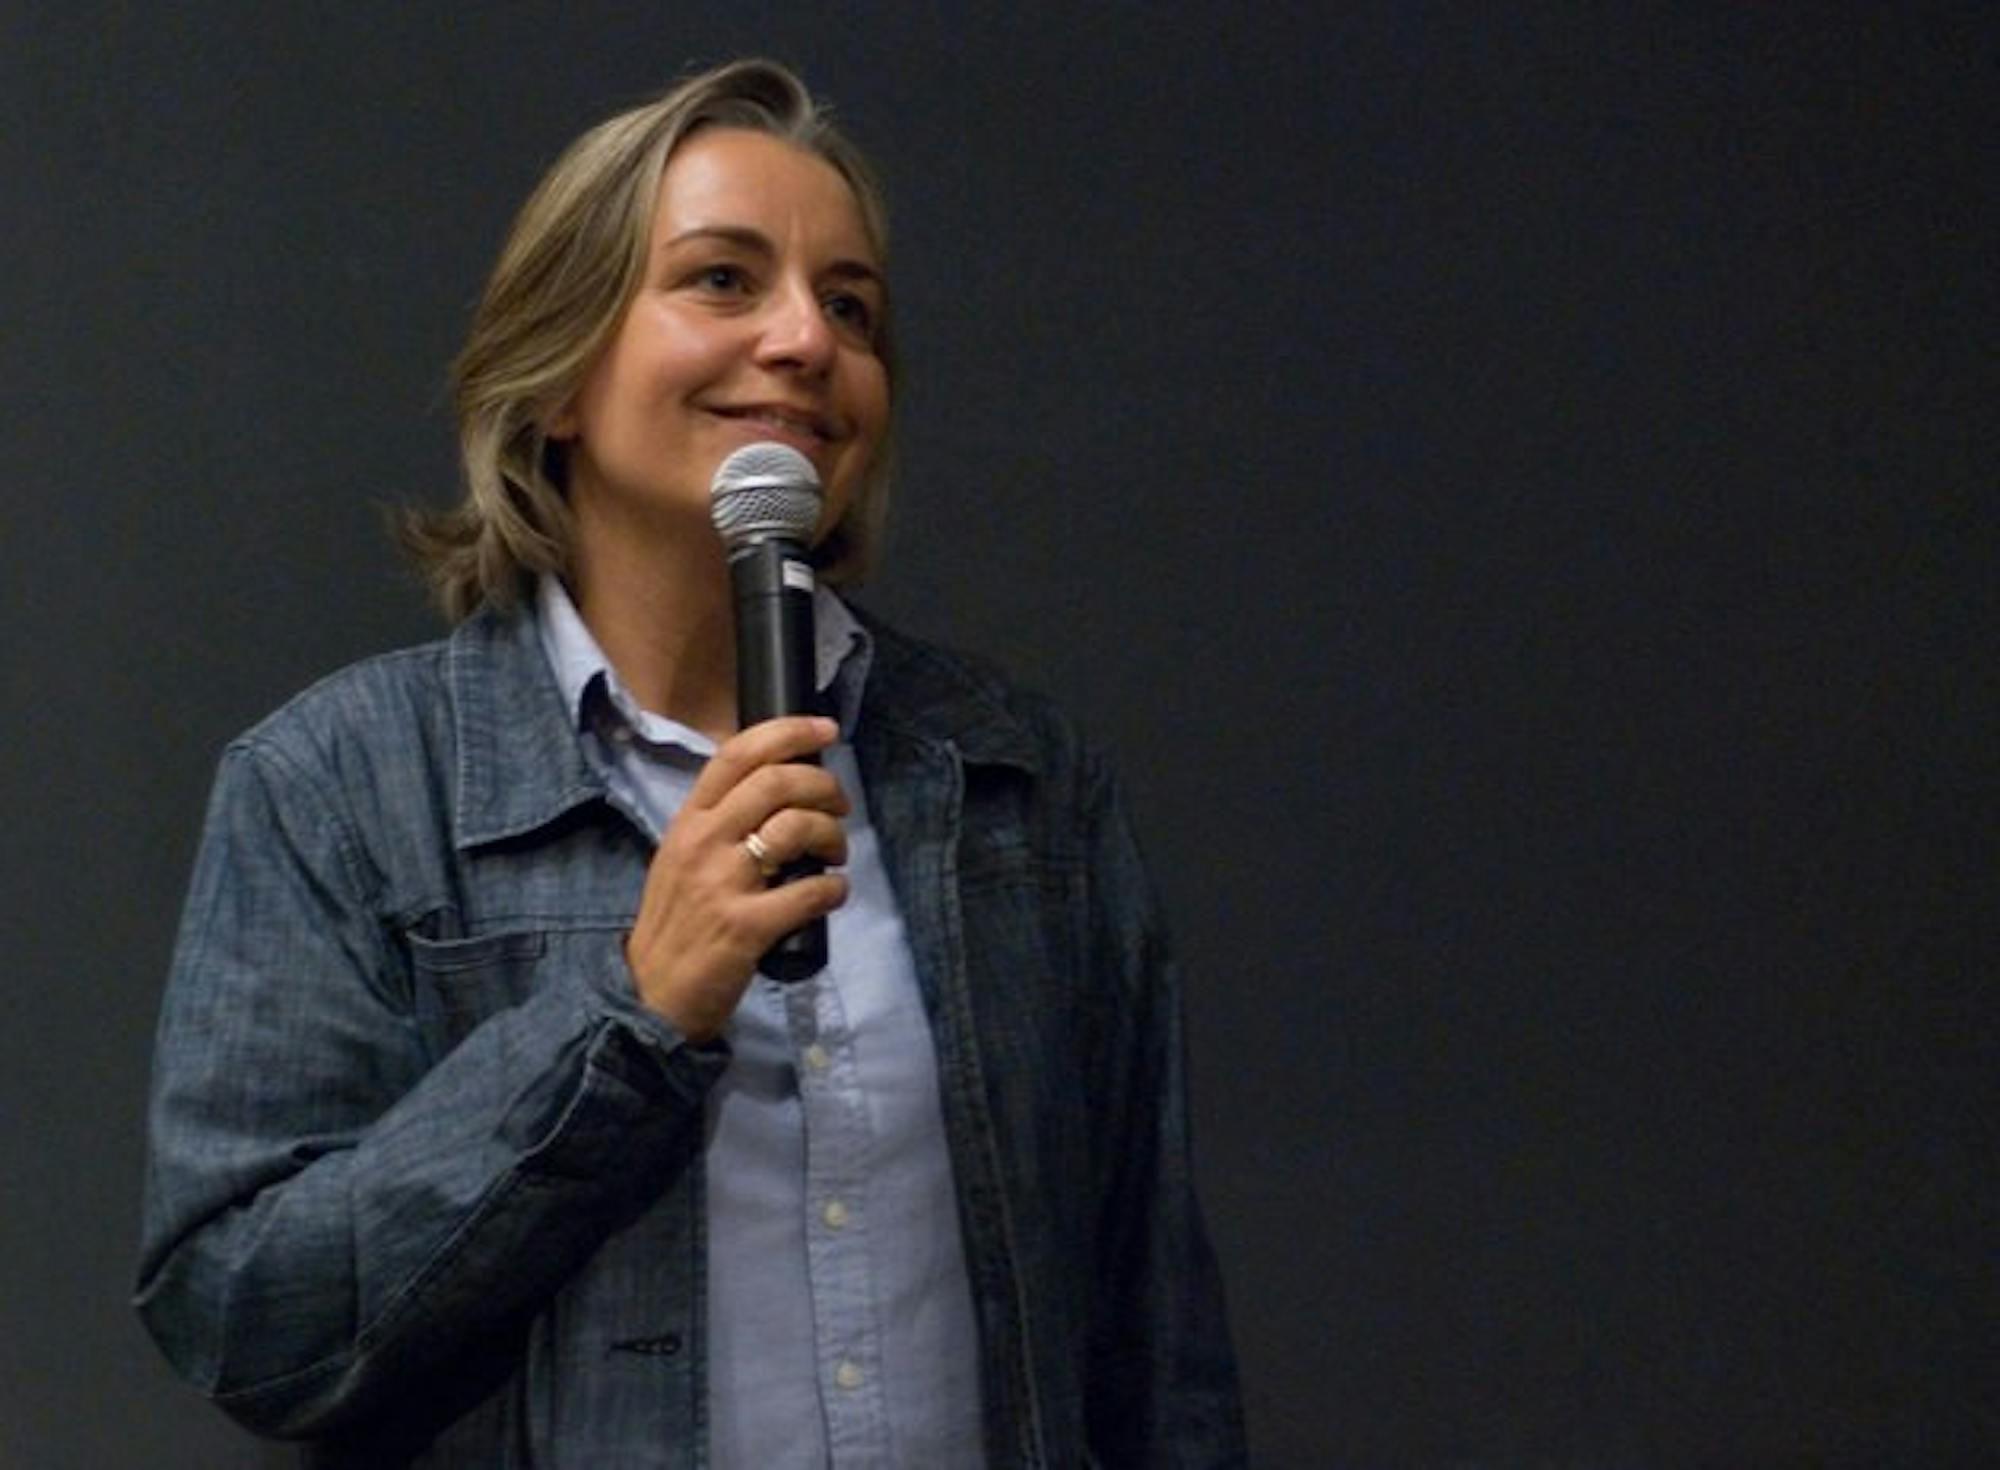 Pulitzer Prize-winning photographer Anja Niedringhaus presents her work in Iraq at the Rockefeller Center Thursday.